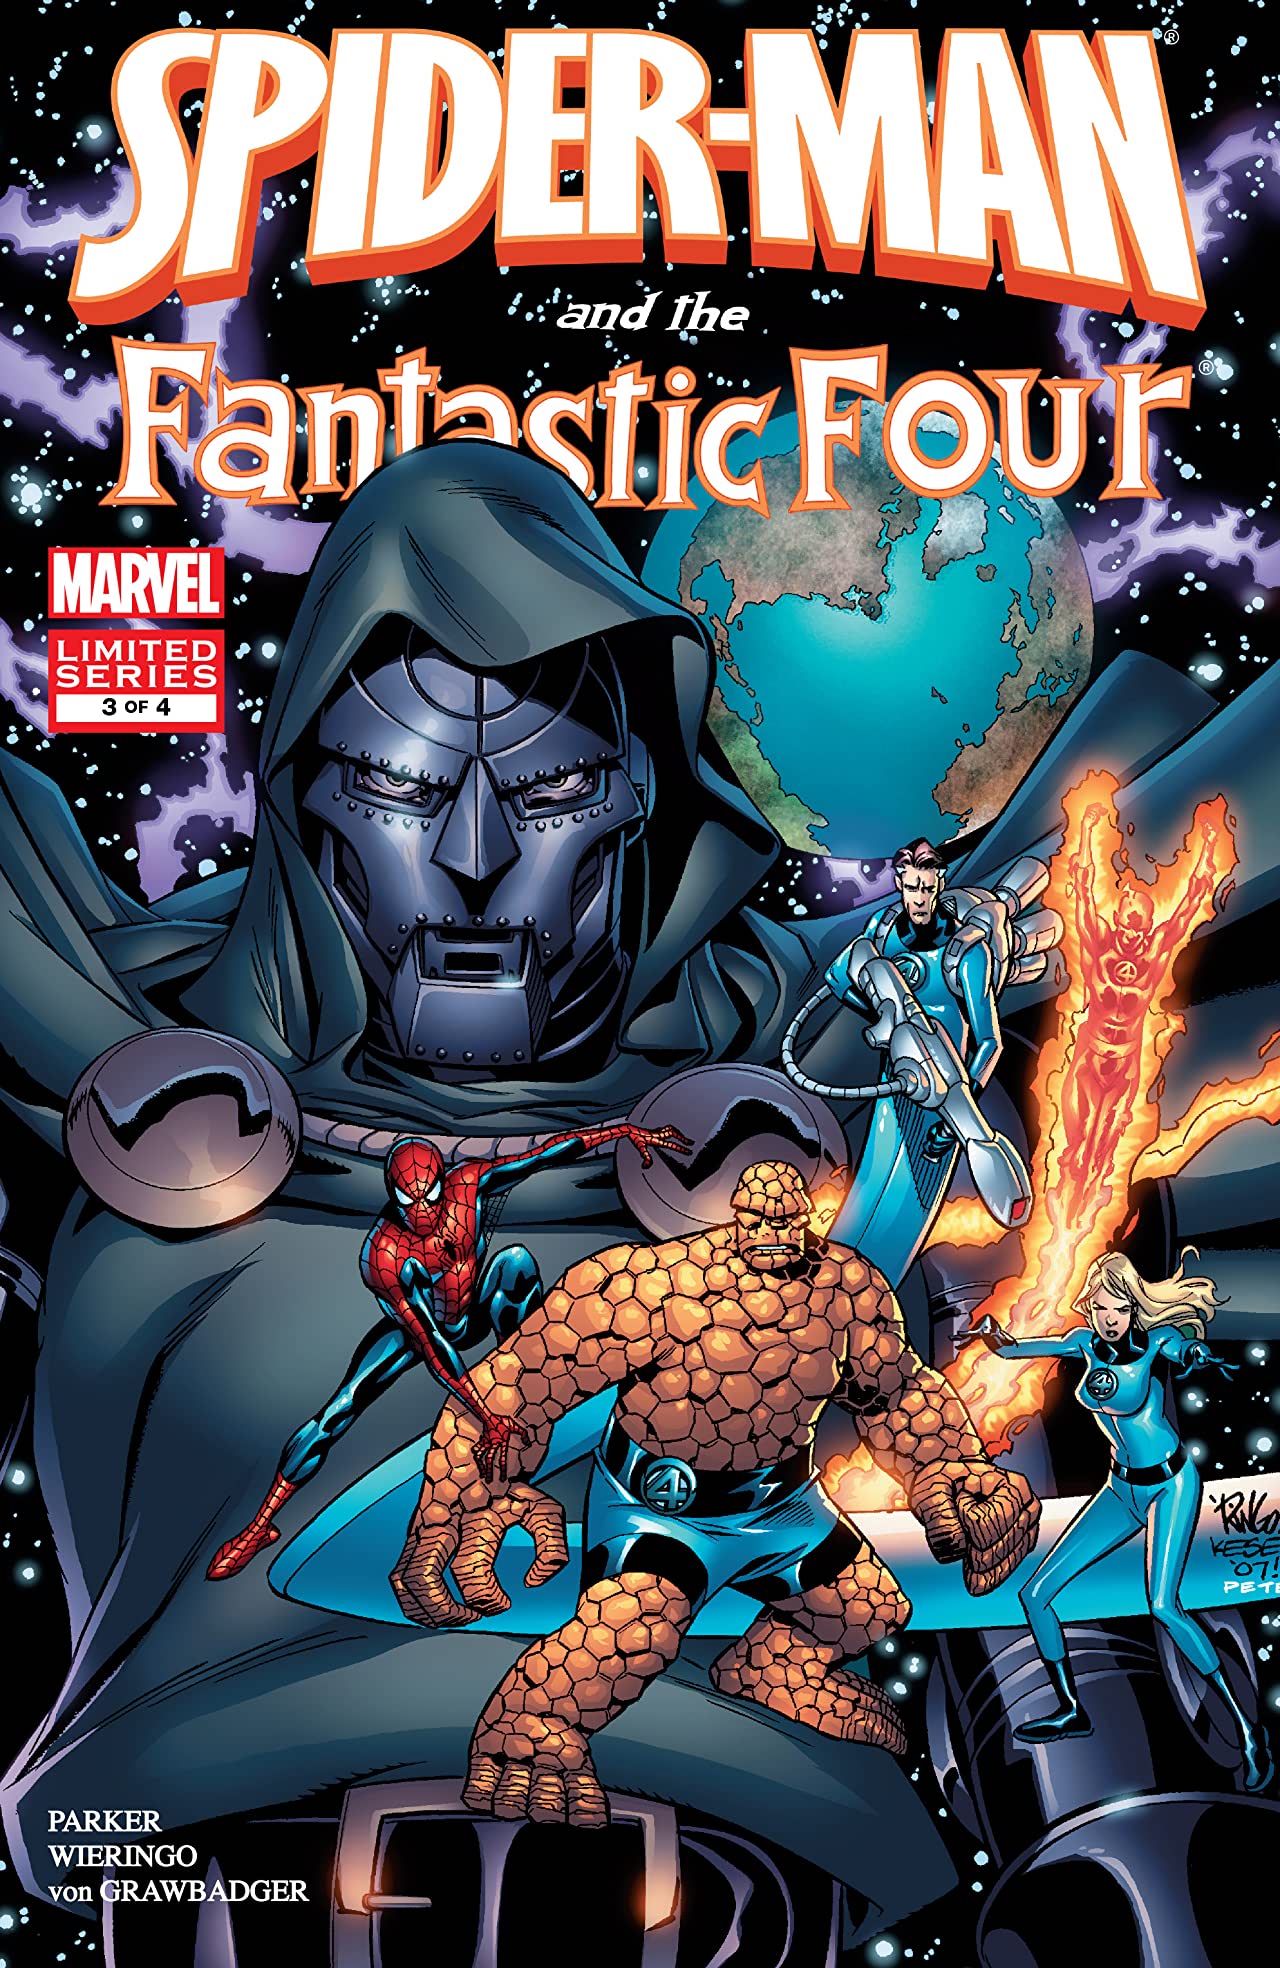 Comic completo Spider-Man and the Fantastic Four